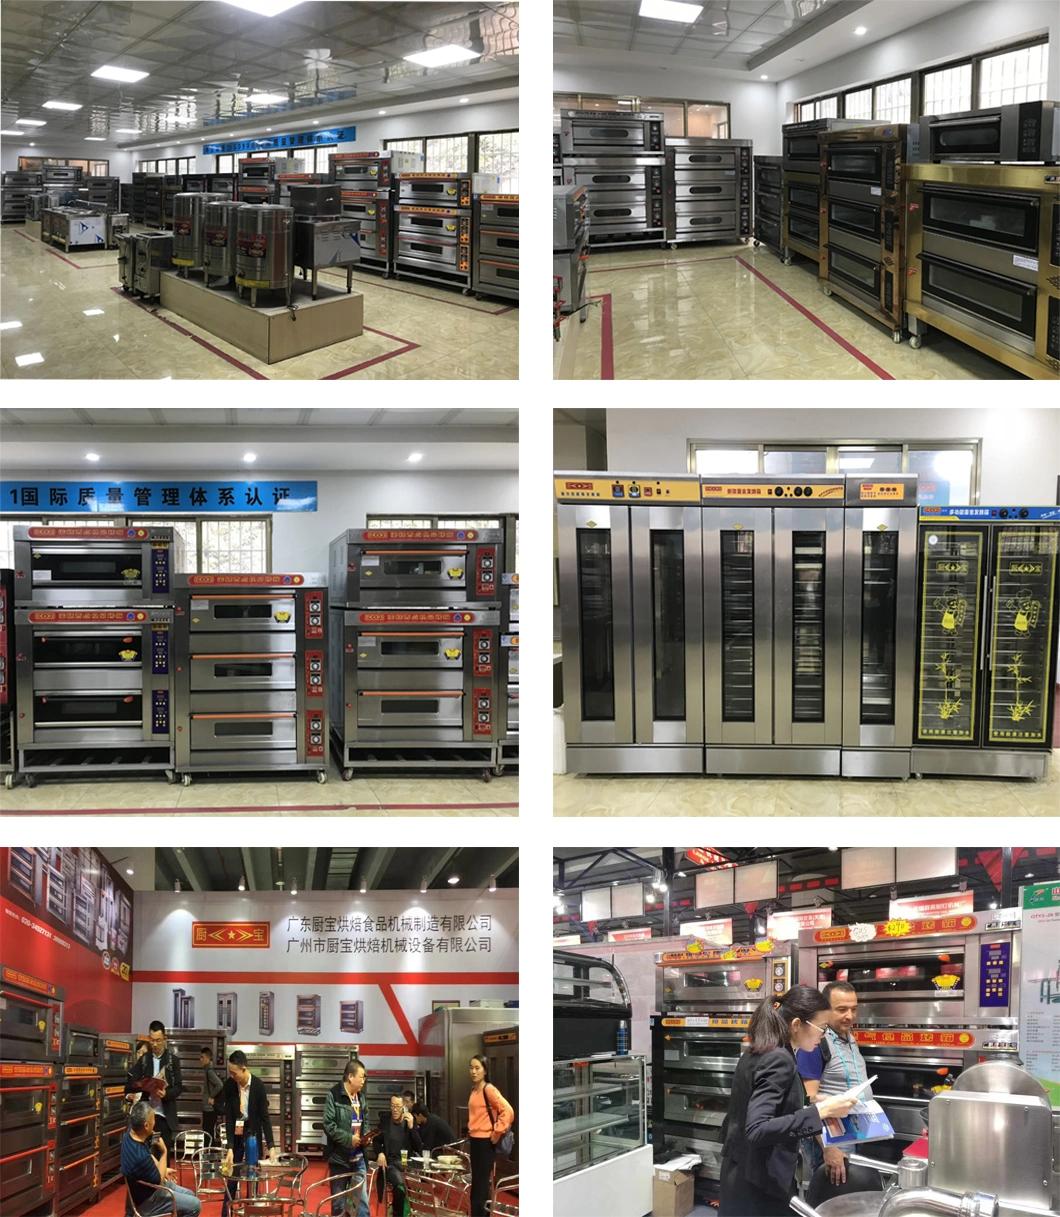 3 Deck 6 Trays Electric Oven for Commercial Restaurant Kitchen of Baking Equipment Bakery Machinery Food Machine